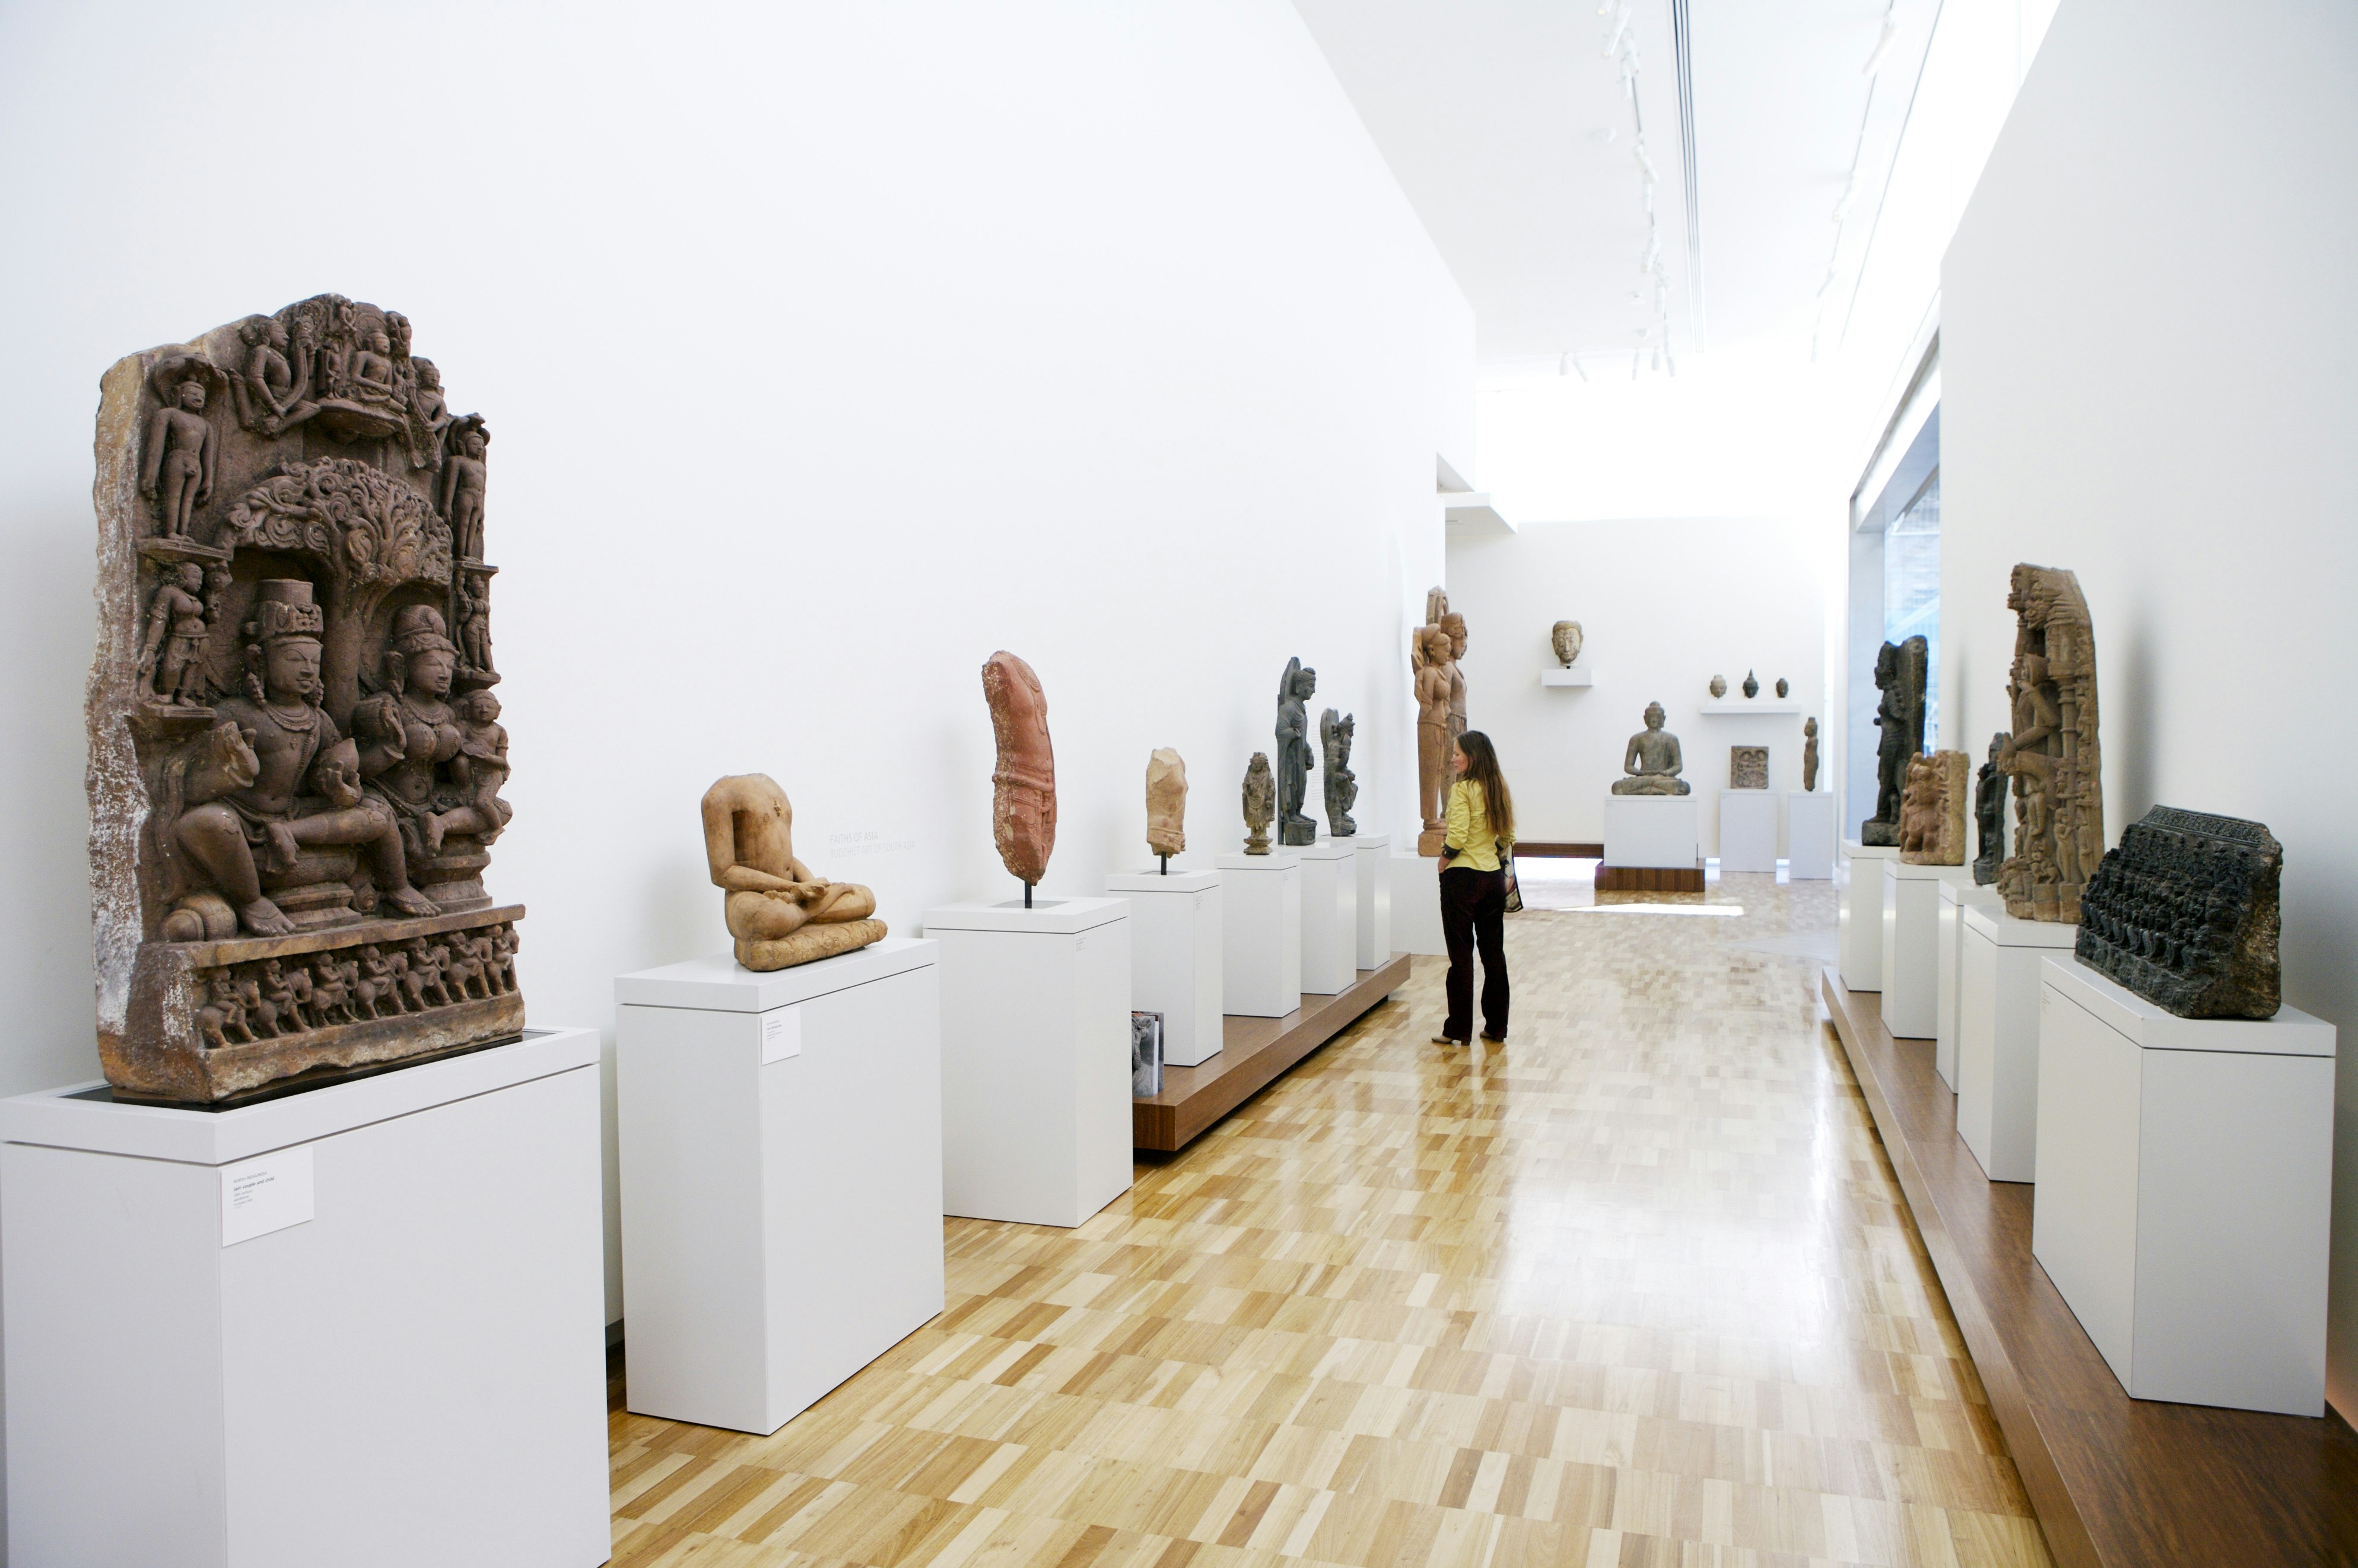 View of a long hallway with sculptures on either side. A woman is looking at a sculpture on one side of the hallway.